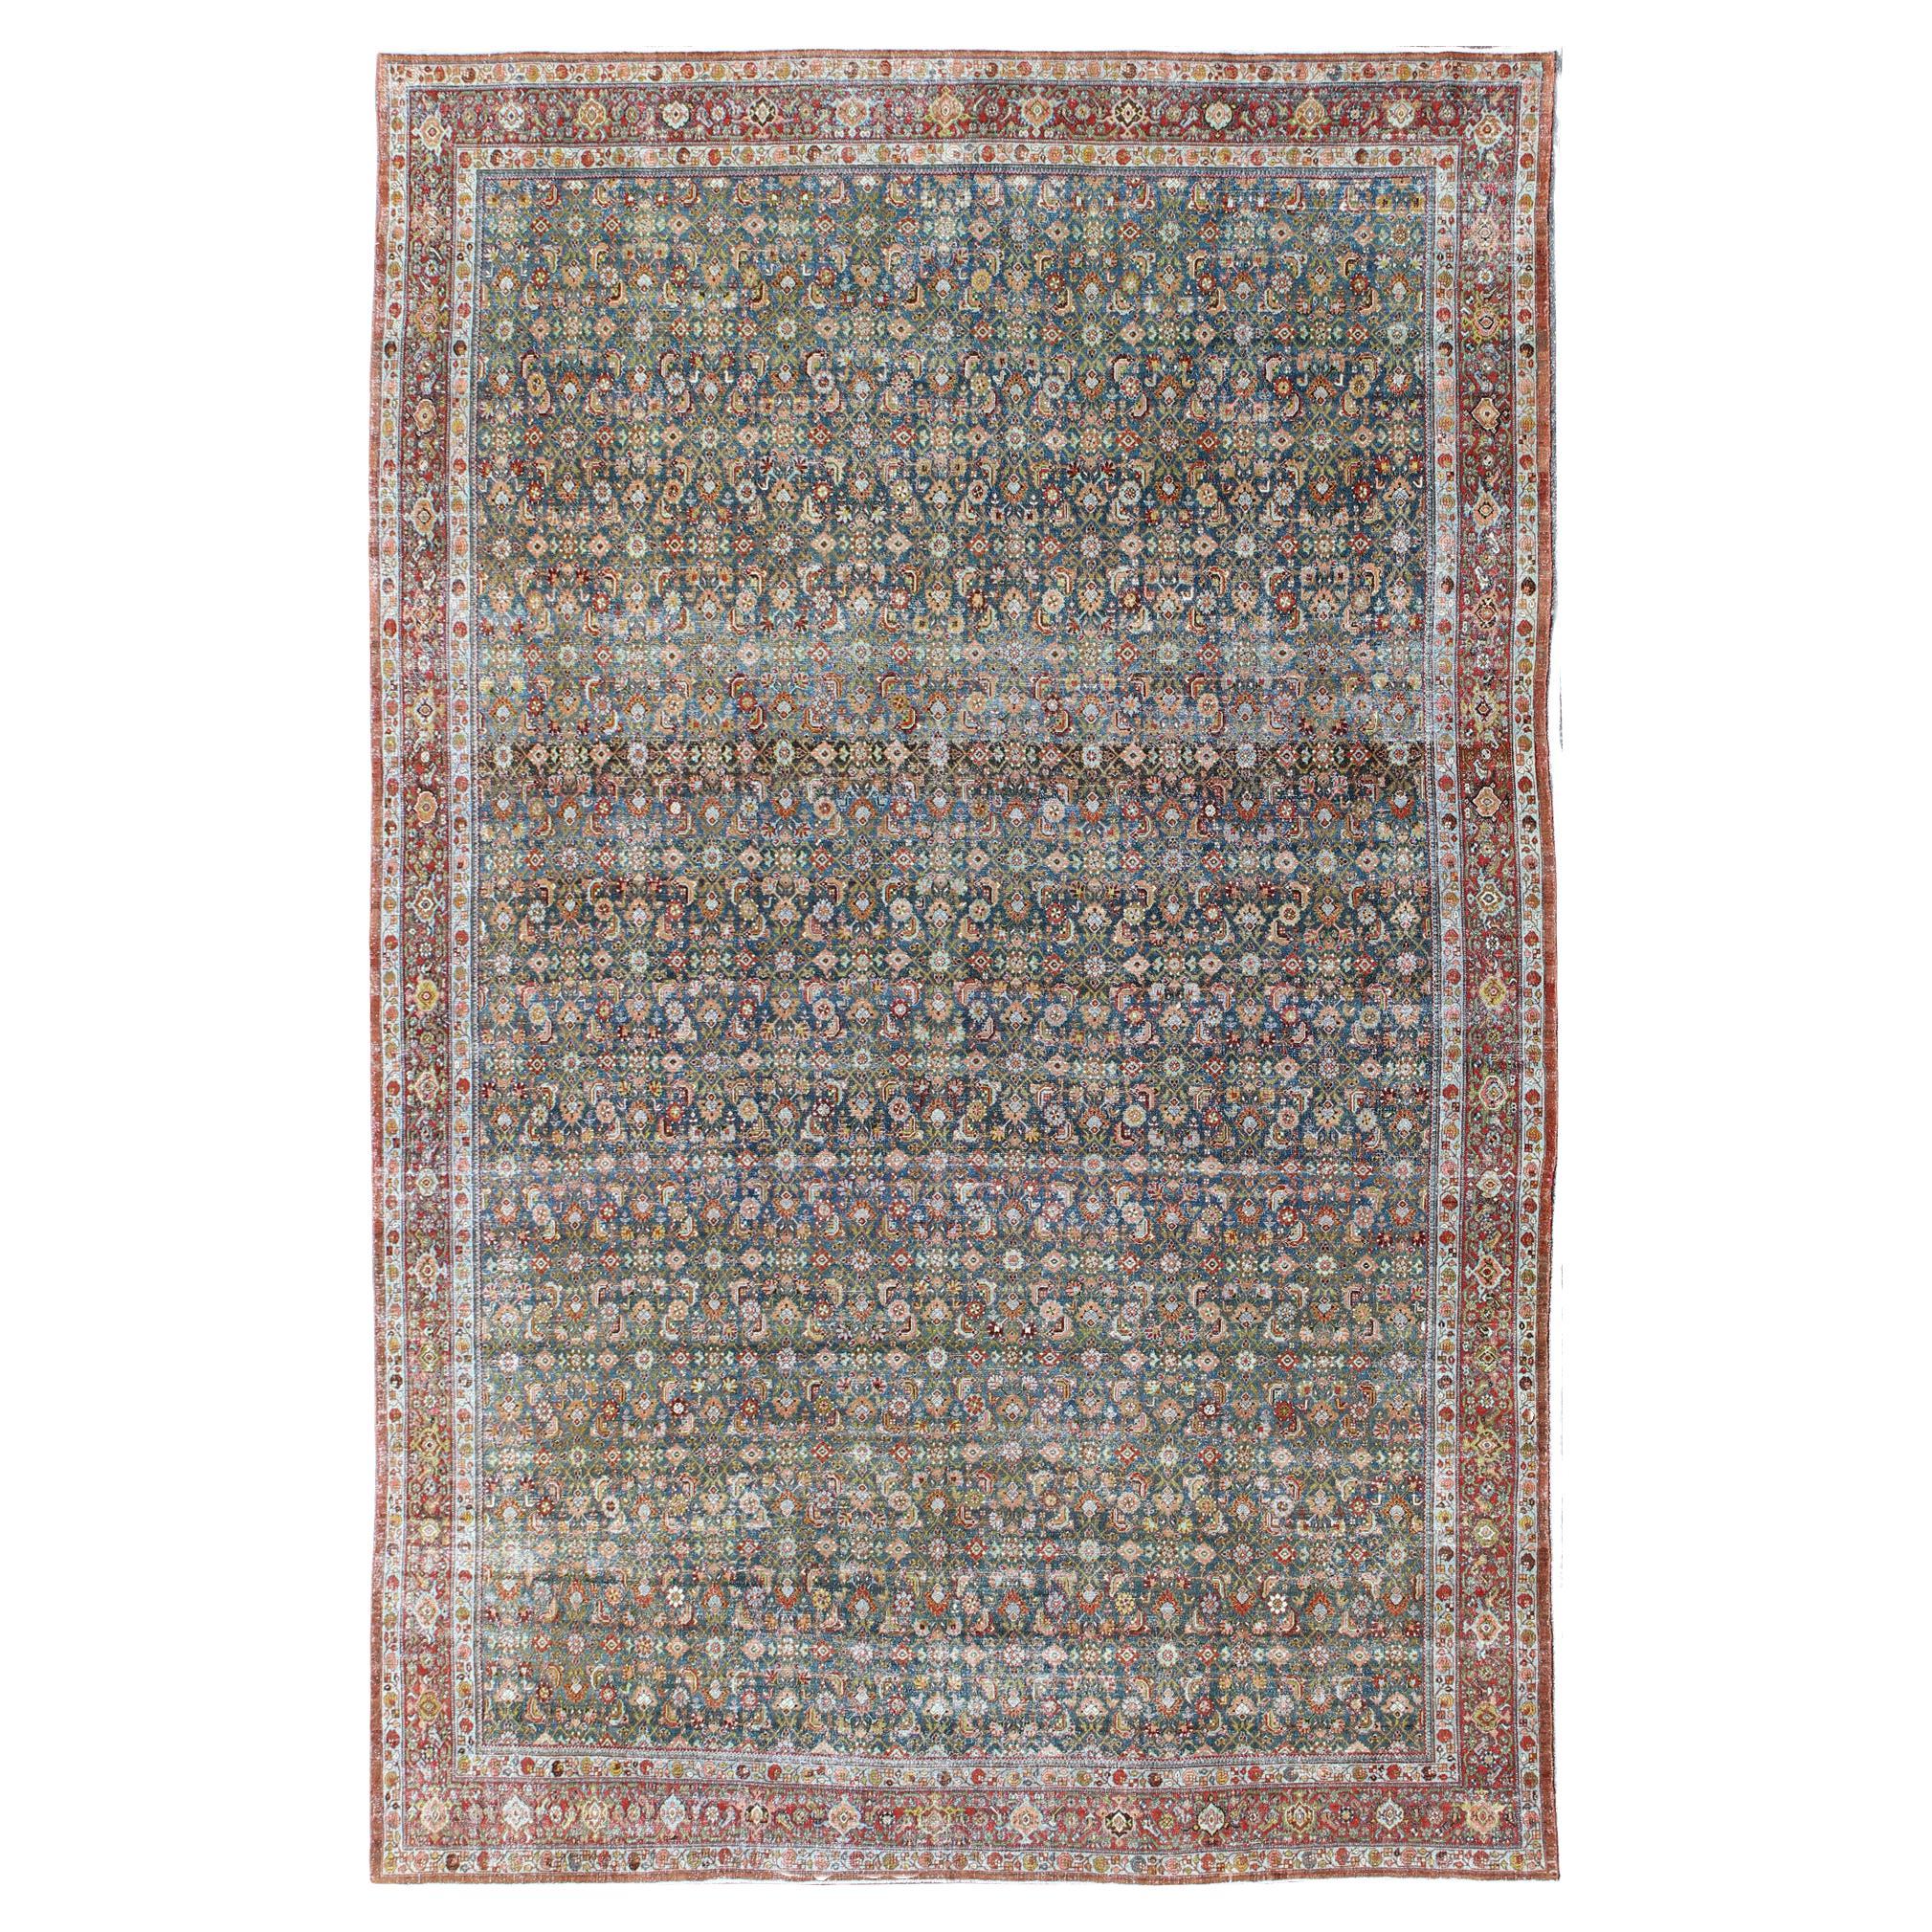 Large Antique Malayer Rug with Herati Pattern in Blue, Green, Teal and Red 